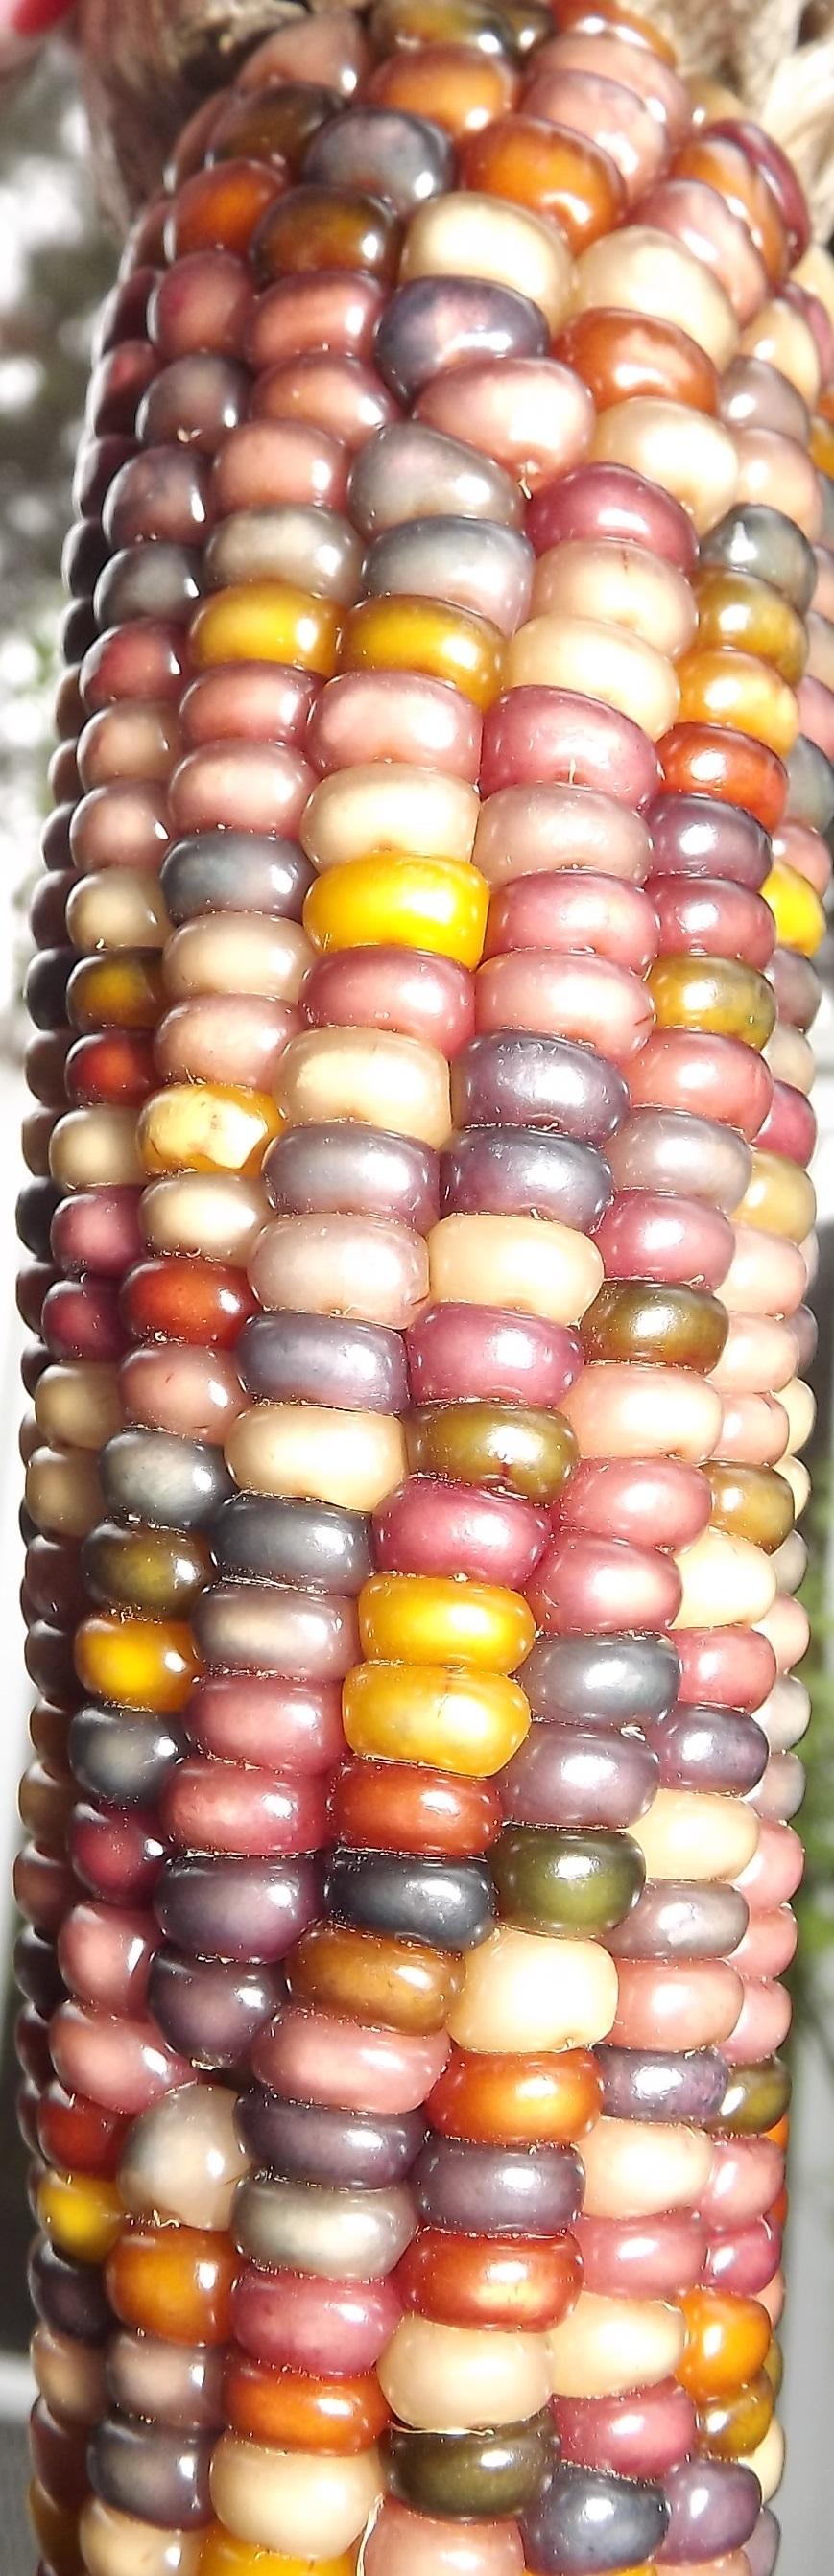 Photo of Popcorn (Zea mays subsp. mays 'Glass Gem') uploaded by EricaBraun